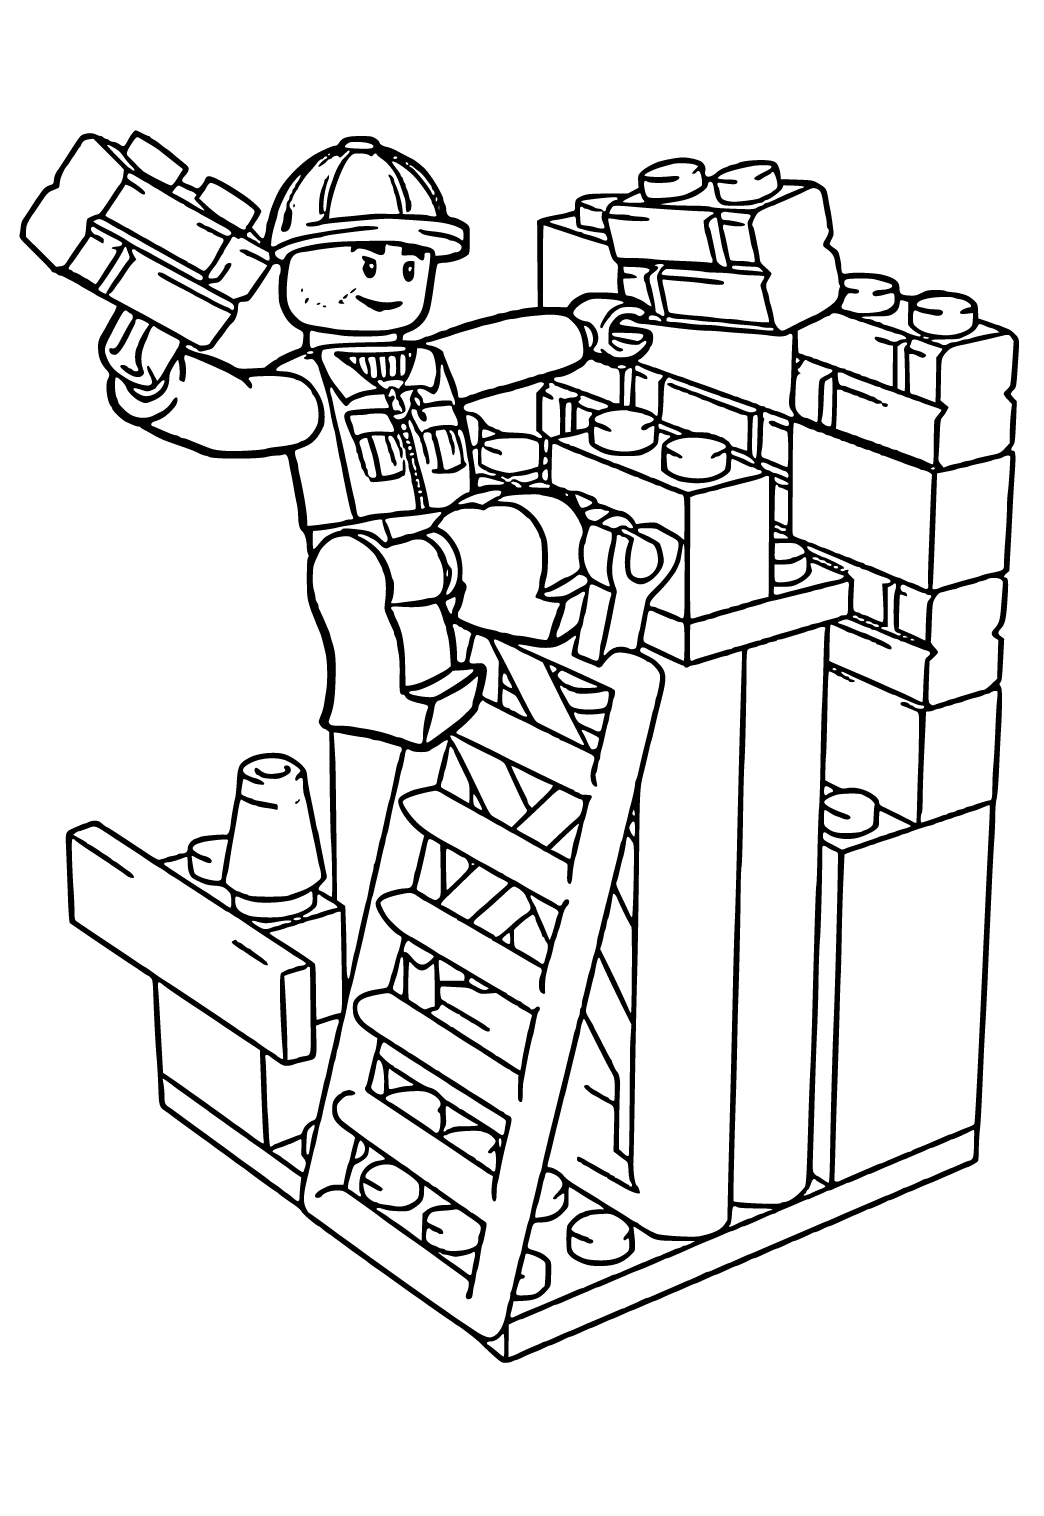 lego fire truck coloring page